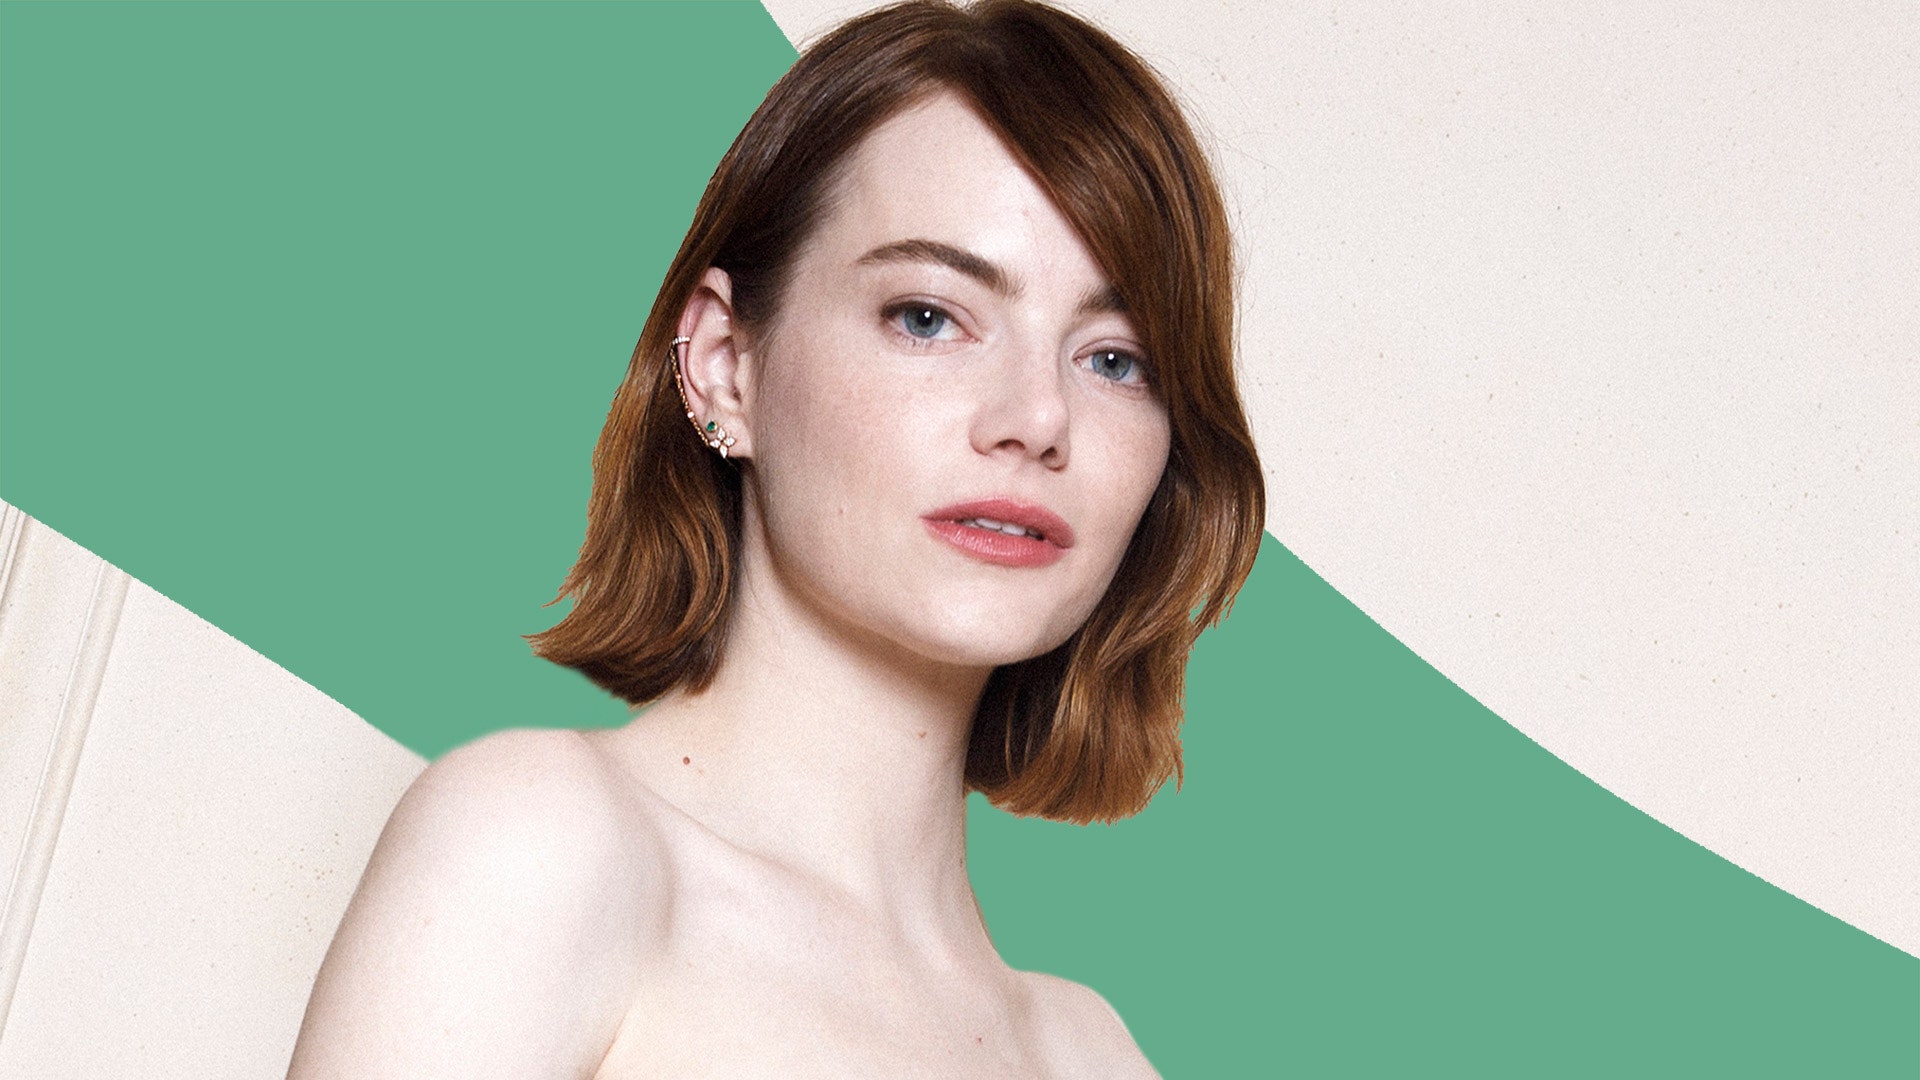 dom snowdon recommends sexy pictures of emma stone pic